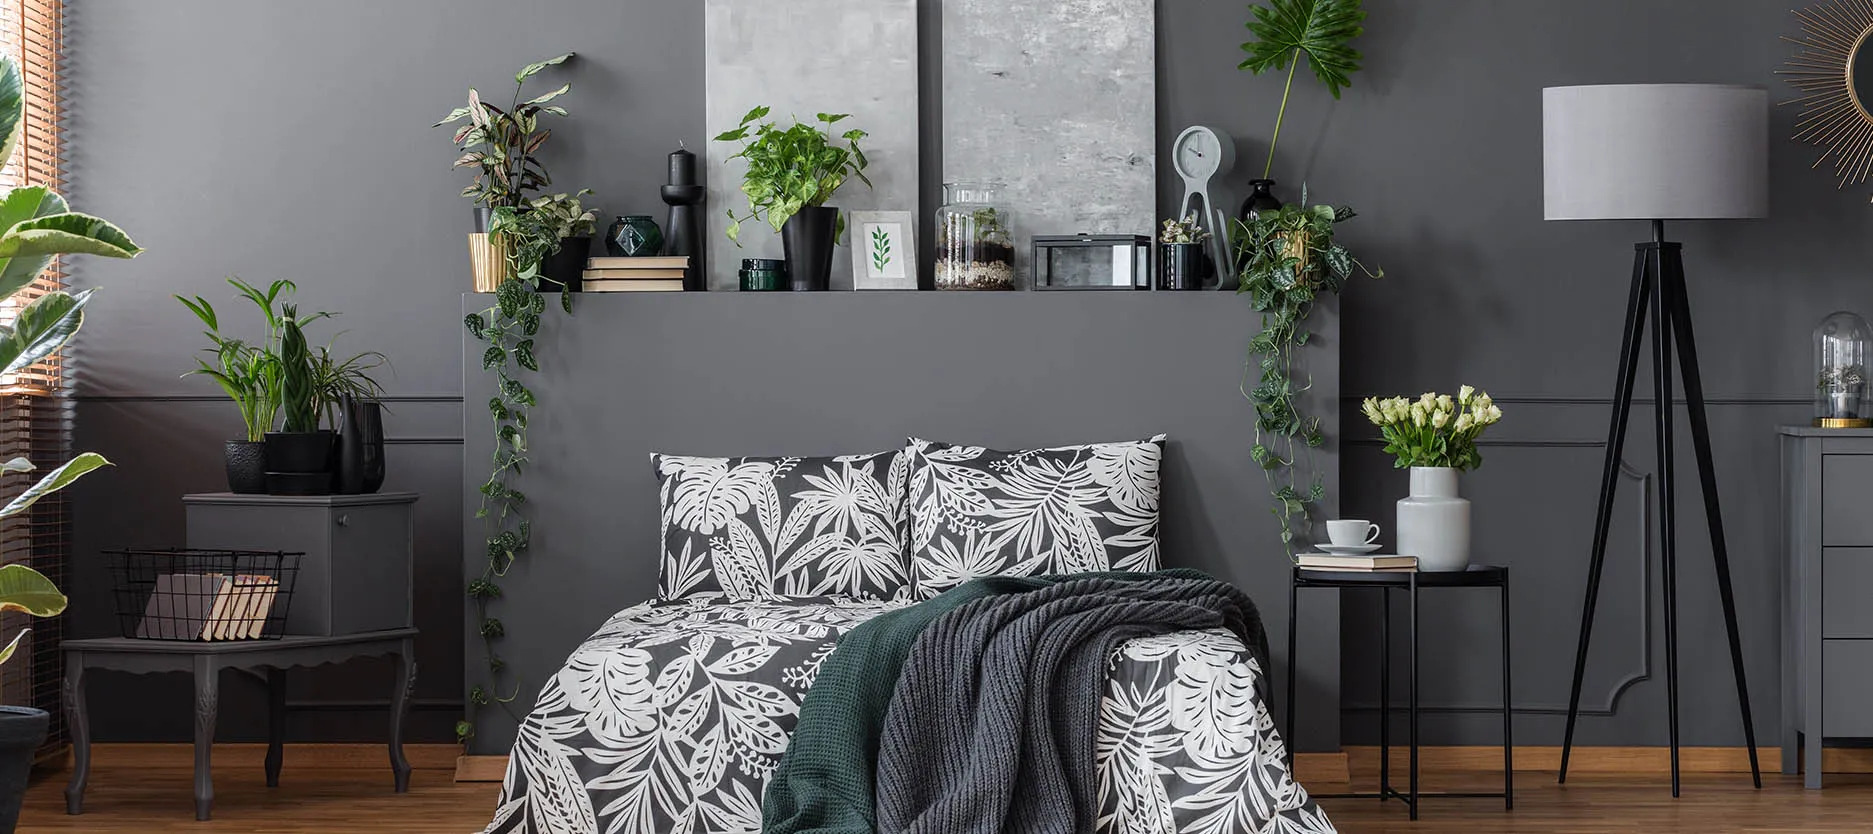 Varied greyscale - a two colour combination for bedroom walls with a minimalist décor